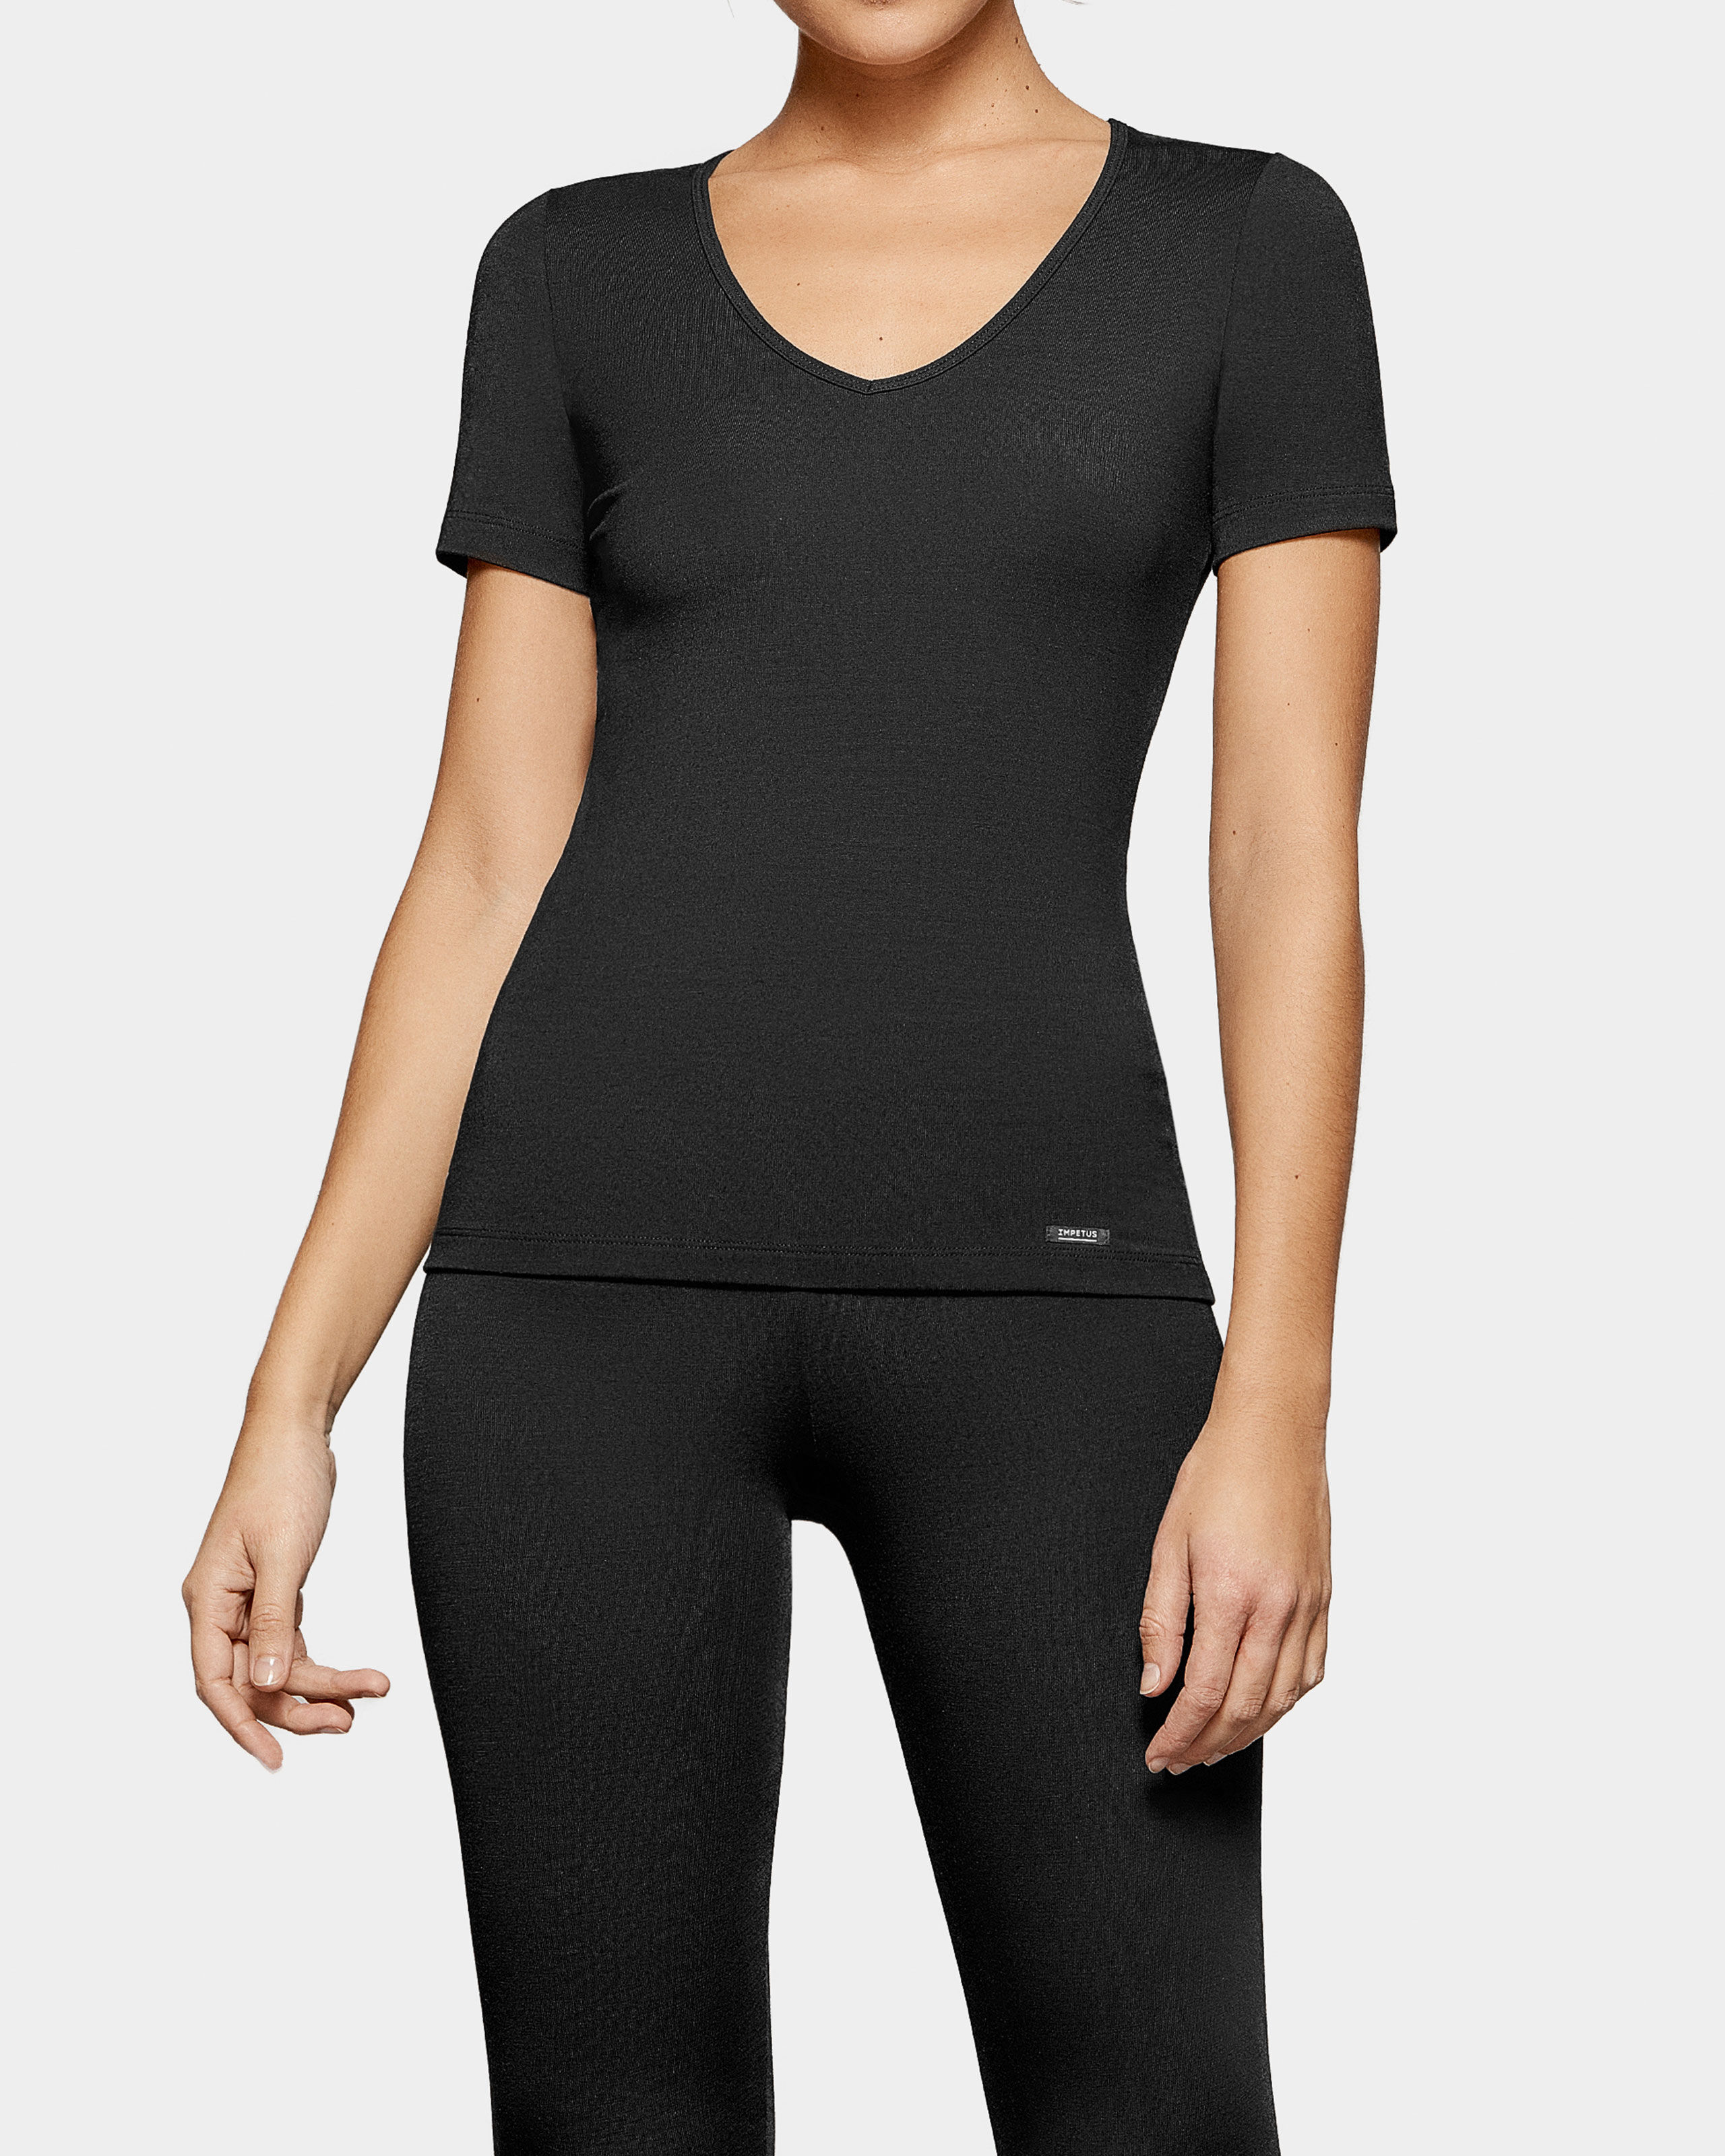 IMPETUS T-shirt de mujer Thermo NEGRO (L)